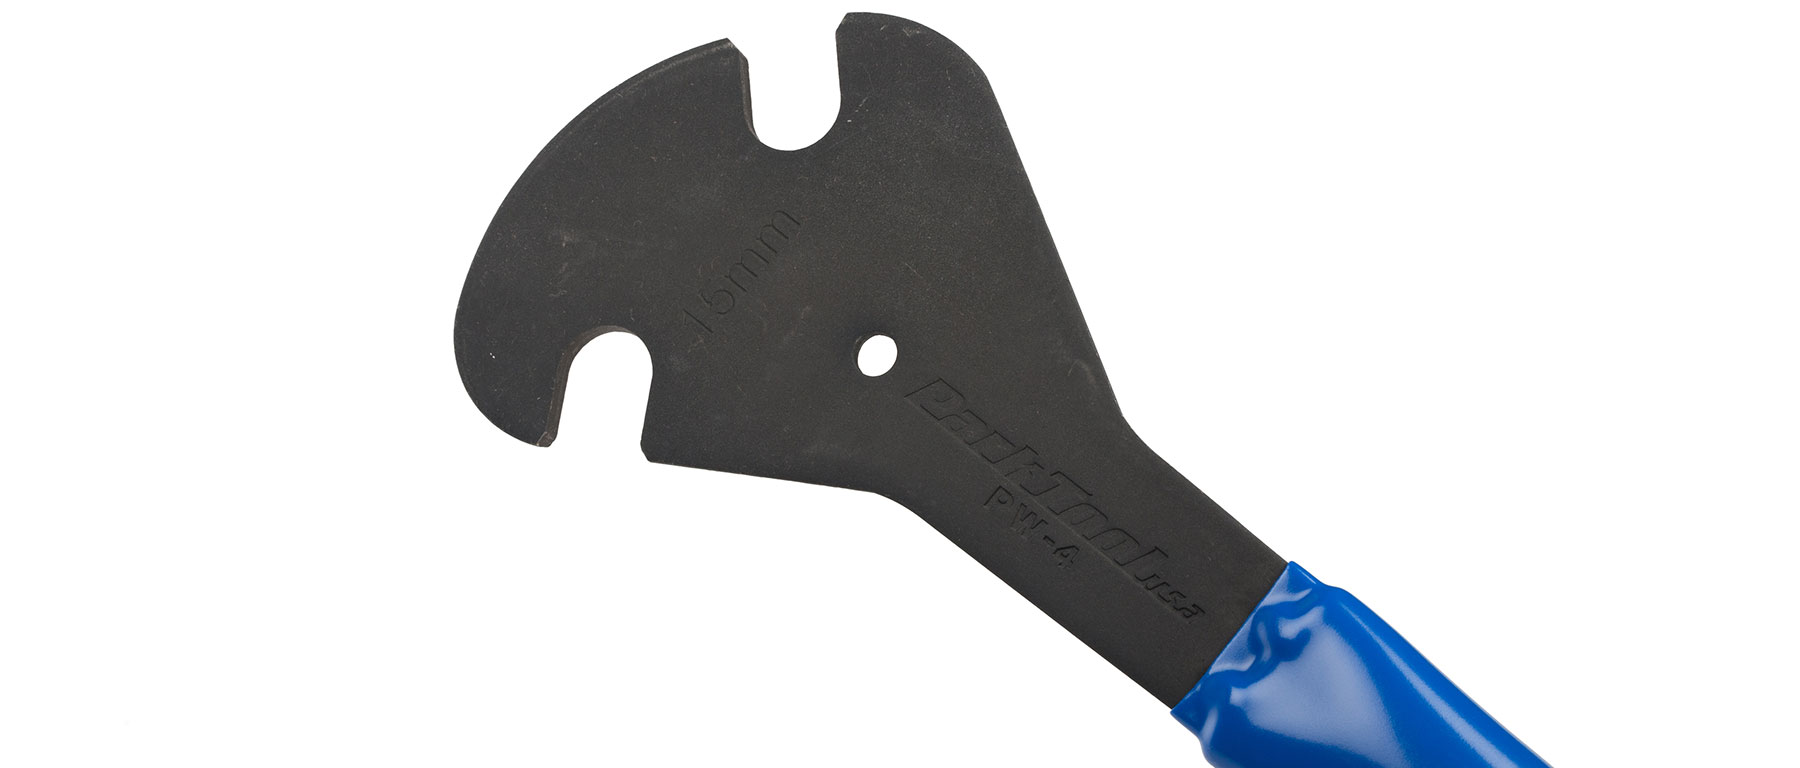 Park Tool PW-4 Pedal Wrench